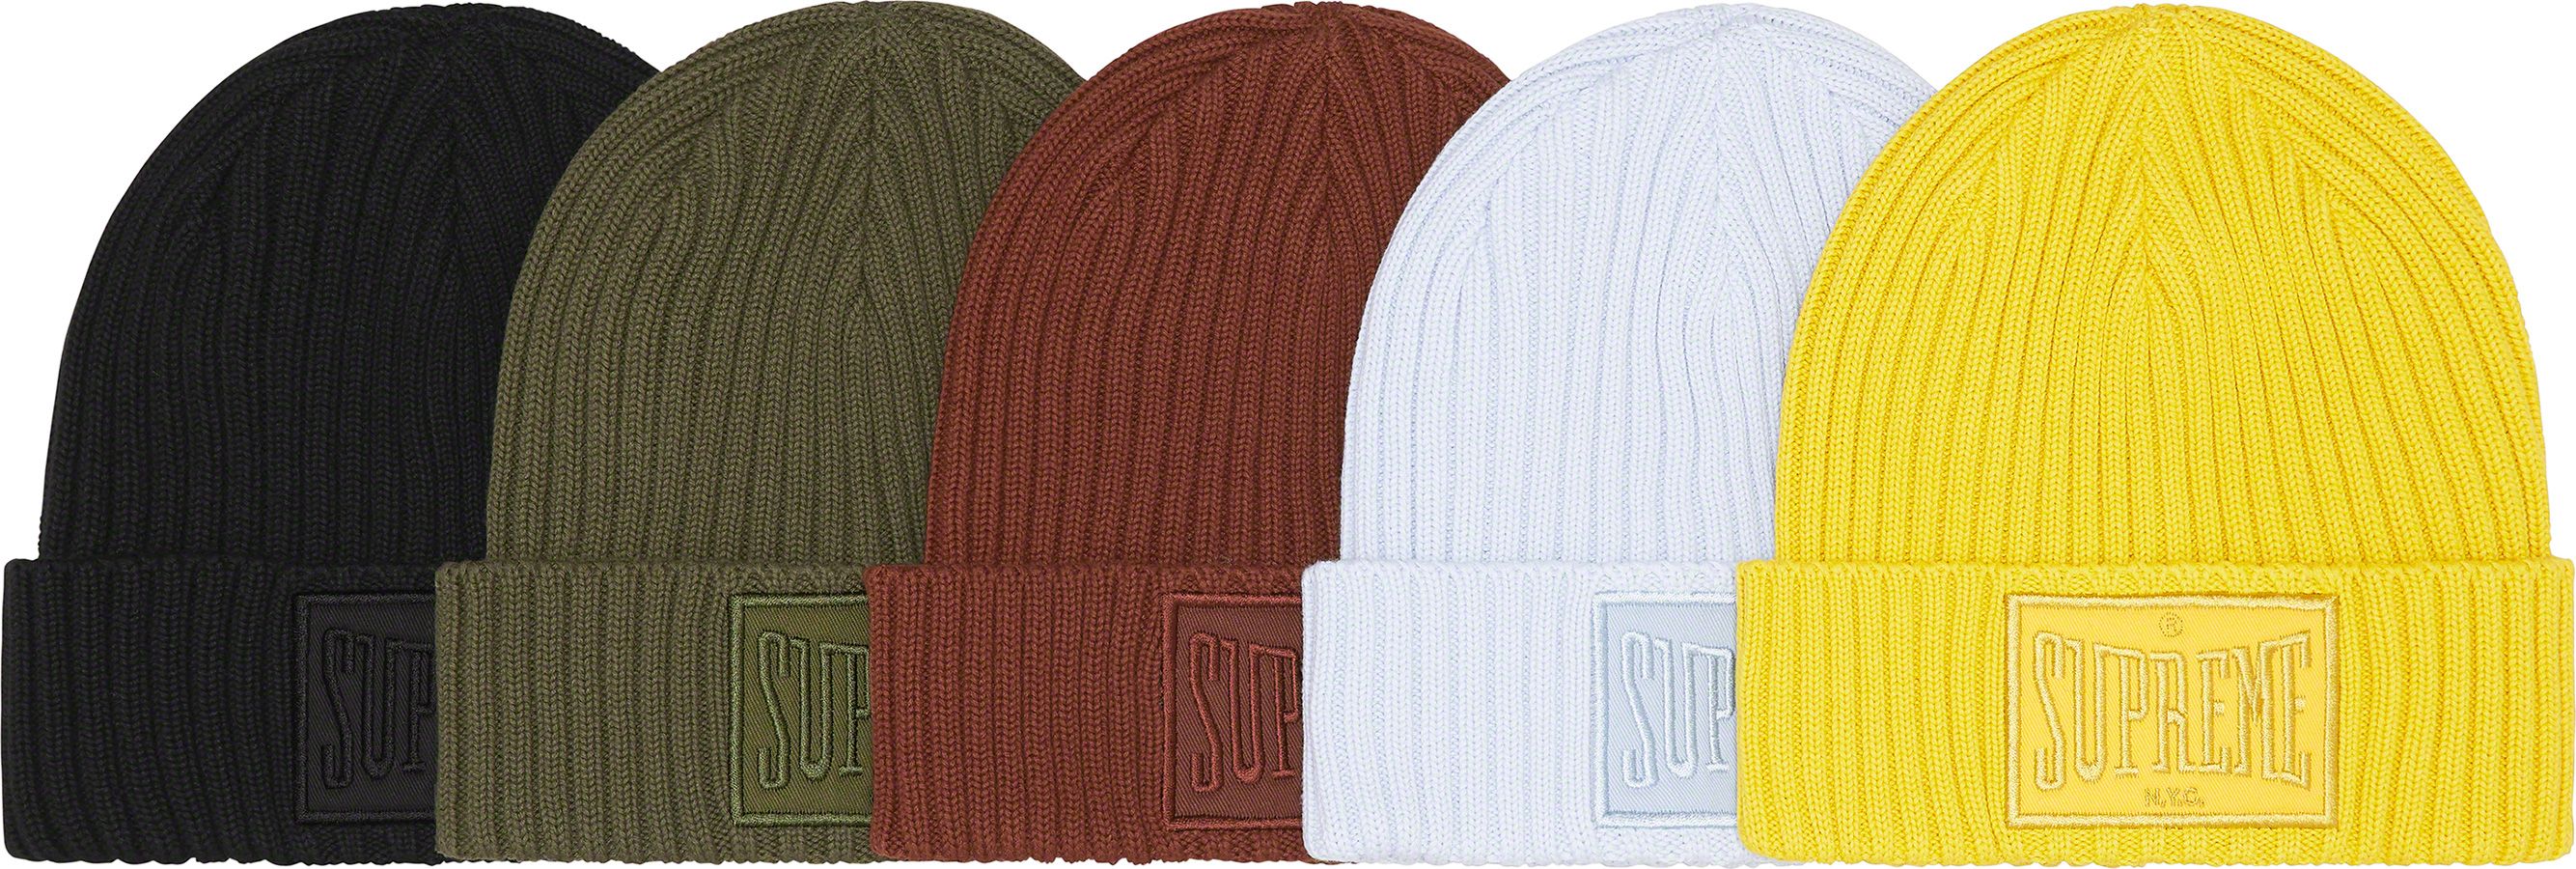 Rainbow Speckle Beanie - Fall/Winter 2022 Preview – Supreme